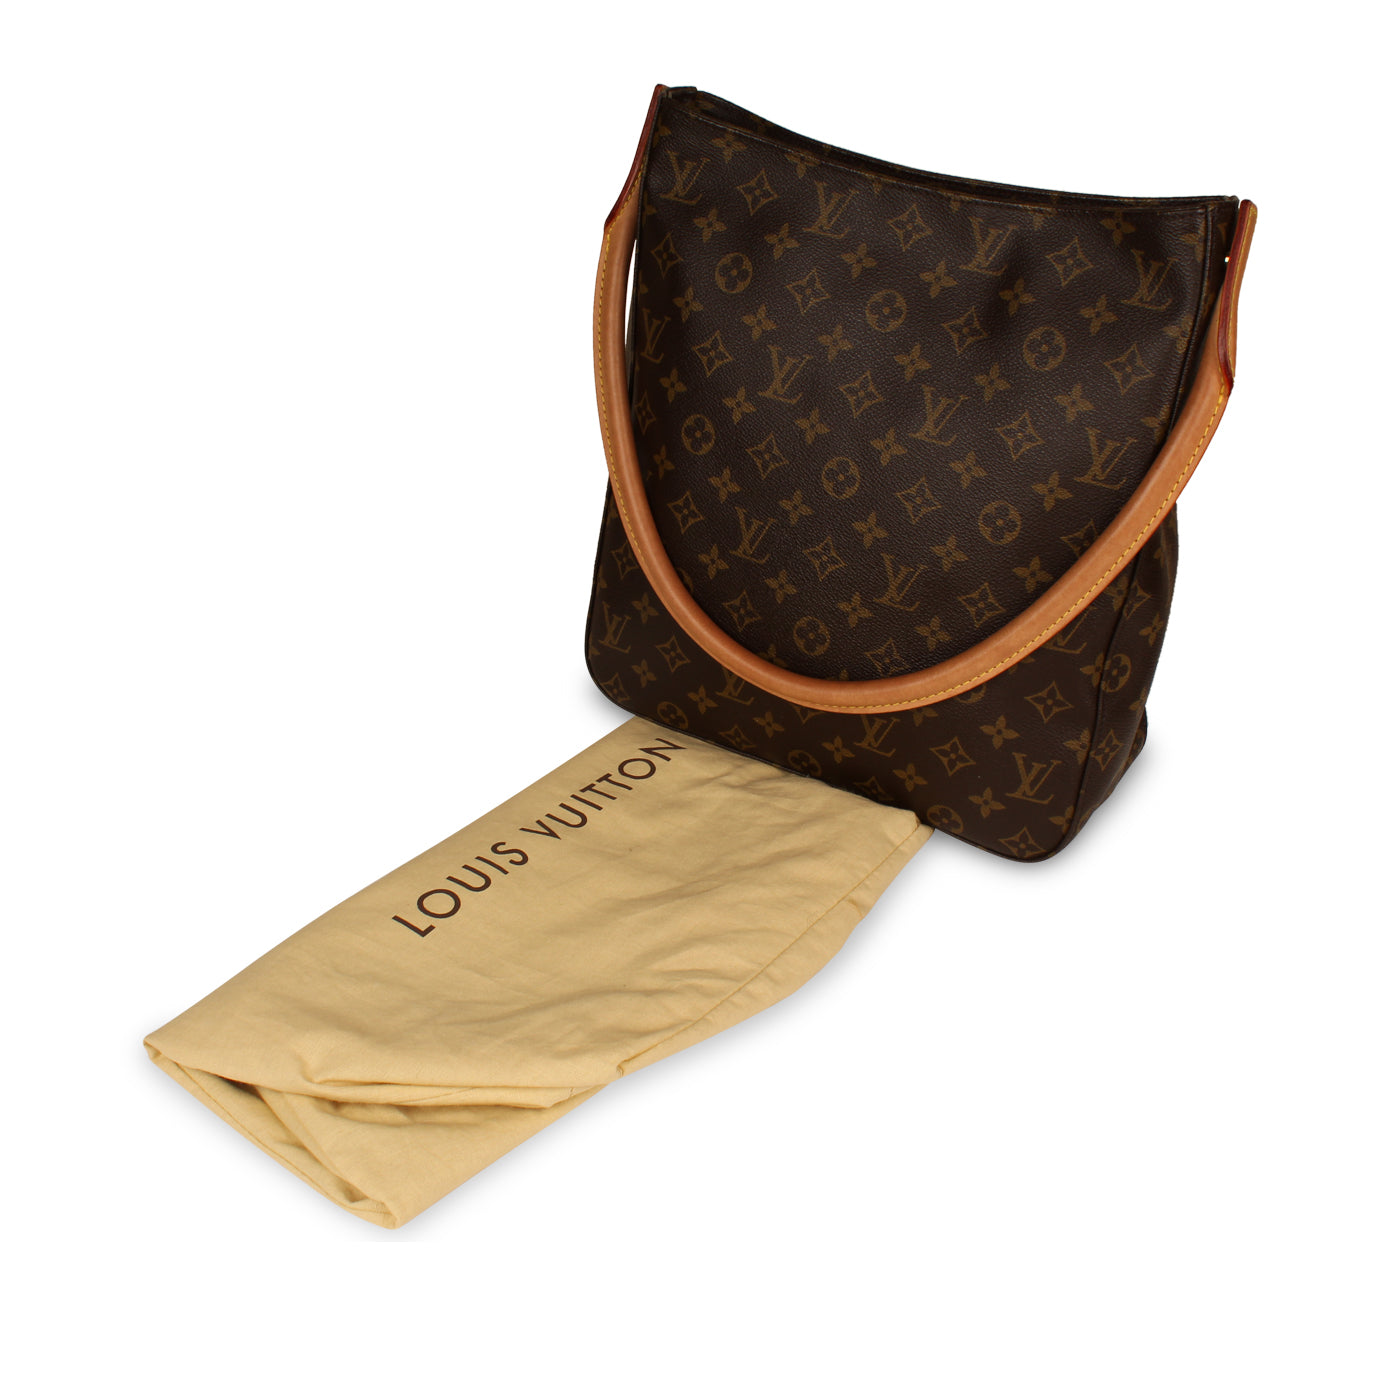 What Goes Around Comes Around Louis Vuitton Monogram Looping Gm Shoulder  Bag